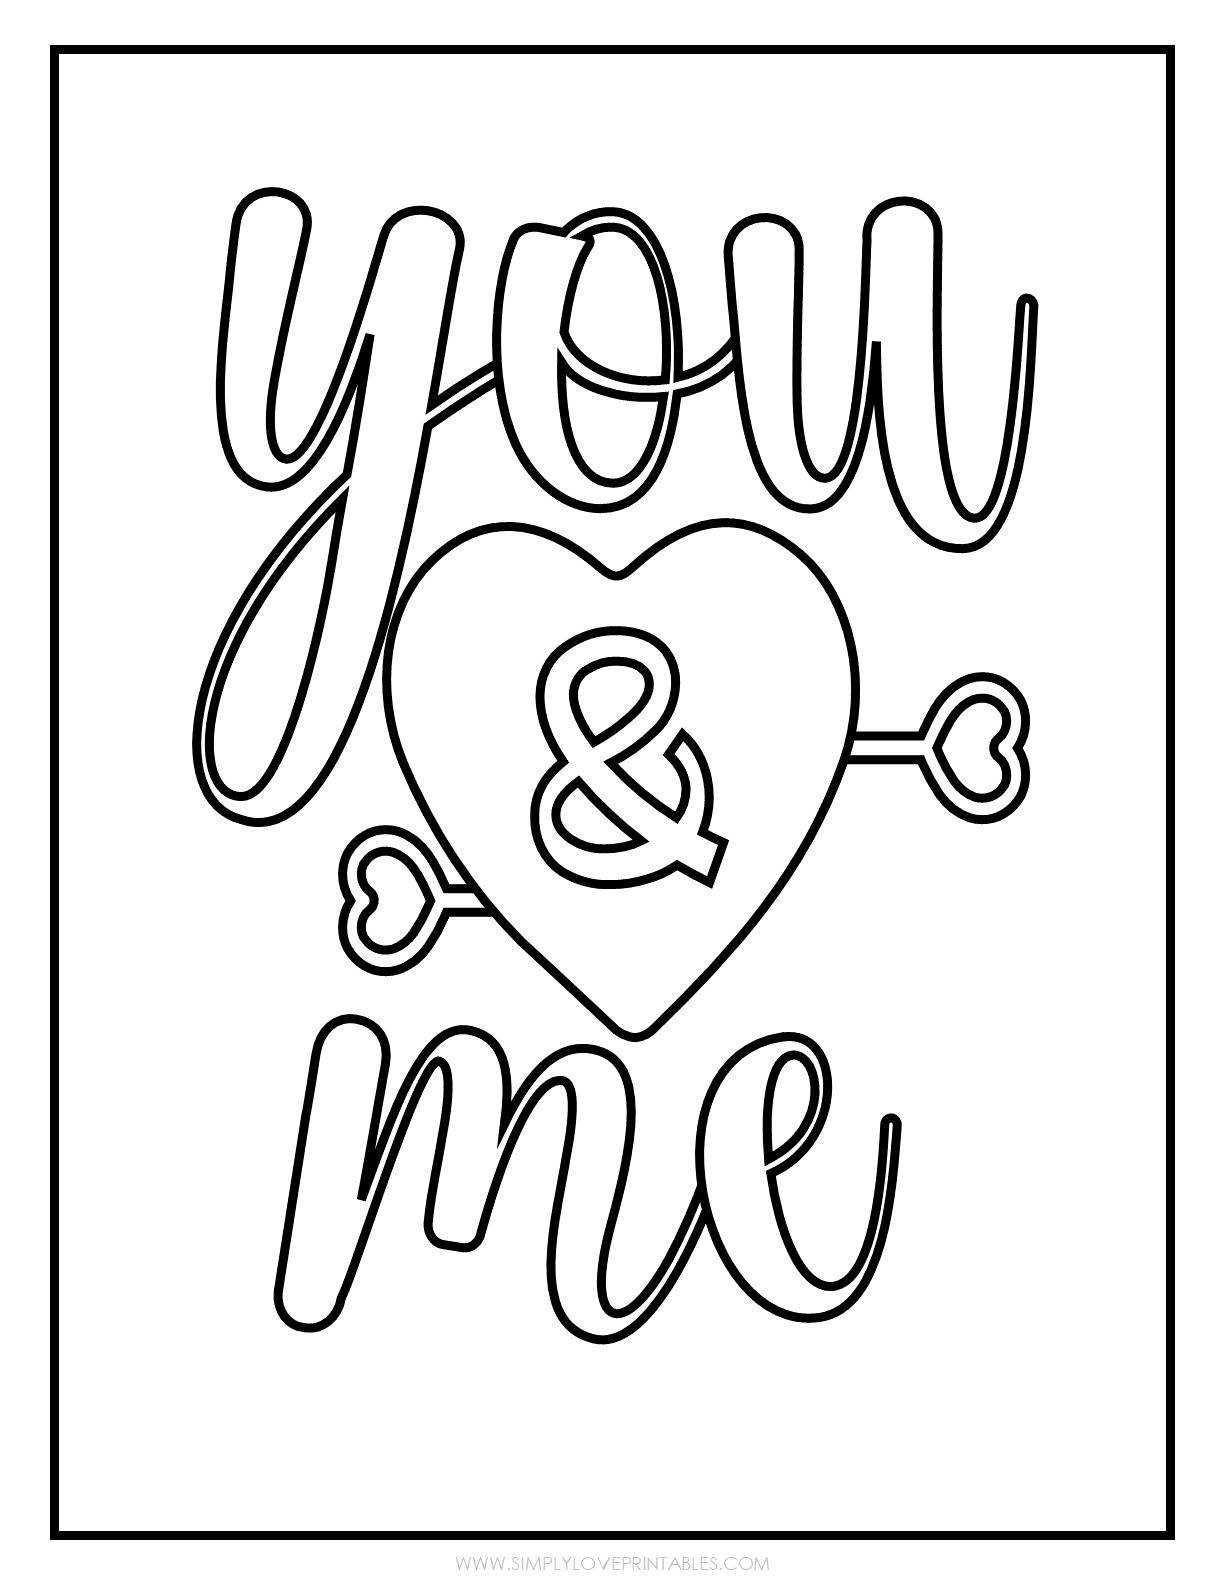 Free valentines day coloring pages simply love printables